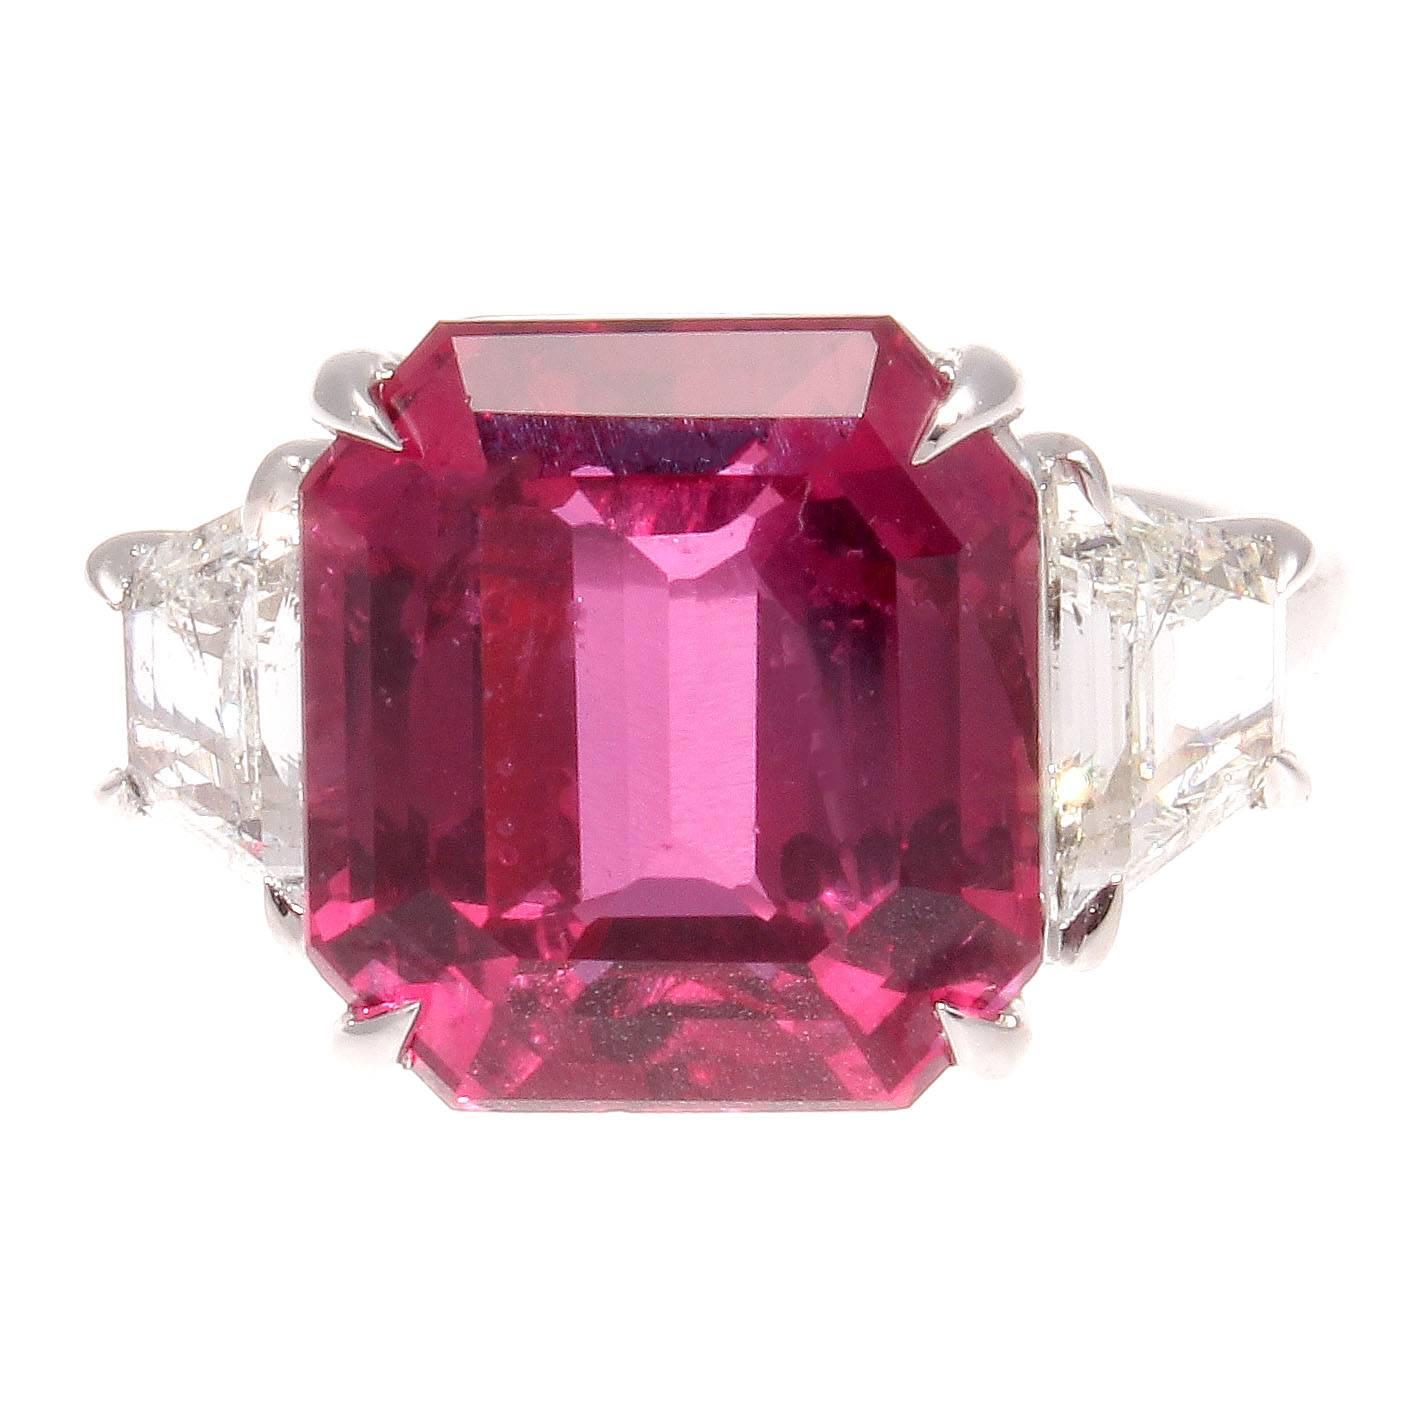 The superior gem quality of the ruby is evident by the clarity and vividness of the color. Rubies with strong color and an absence of eye visible clarity characteristics are rare and desirable. 

Featuring a 10.02 carat SSEF certified reddish-purple